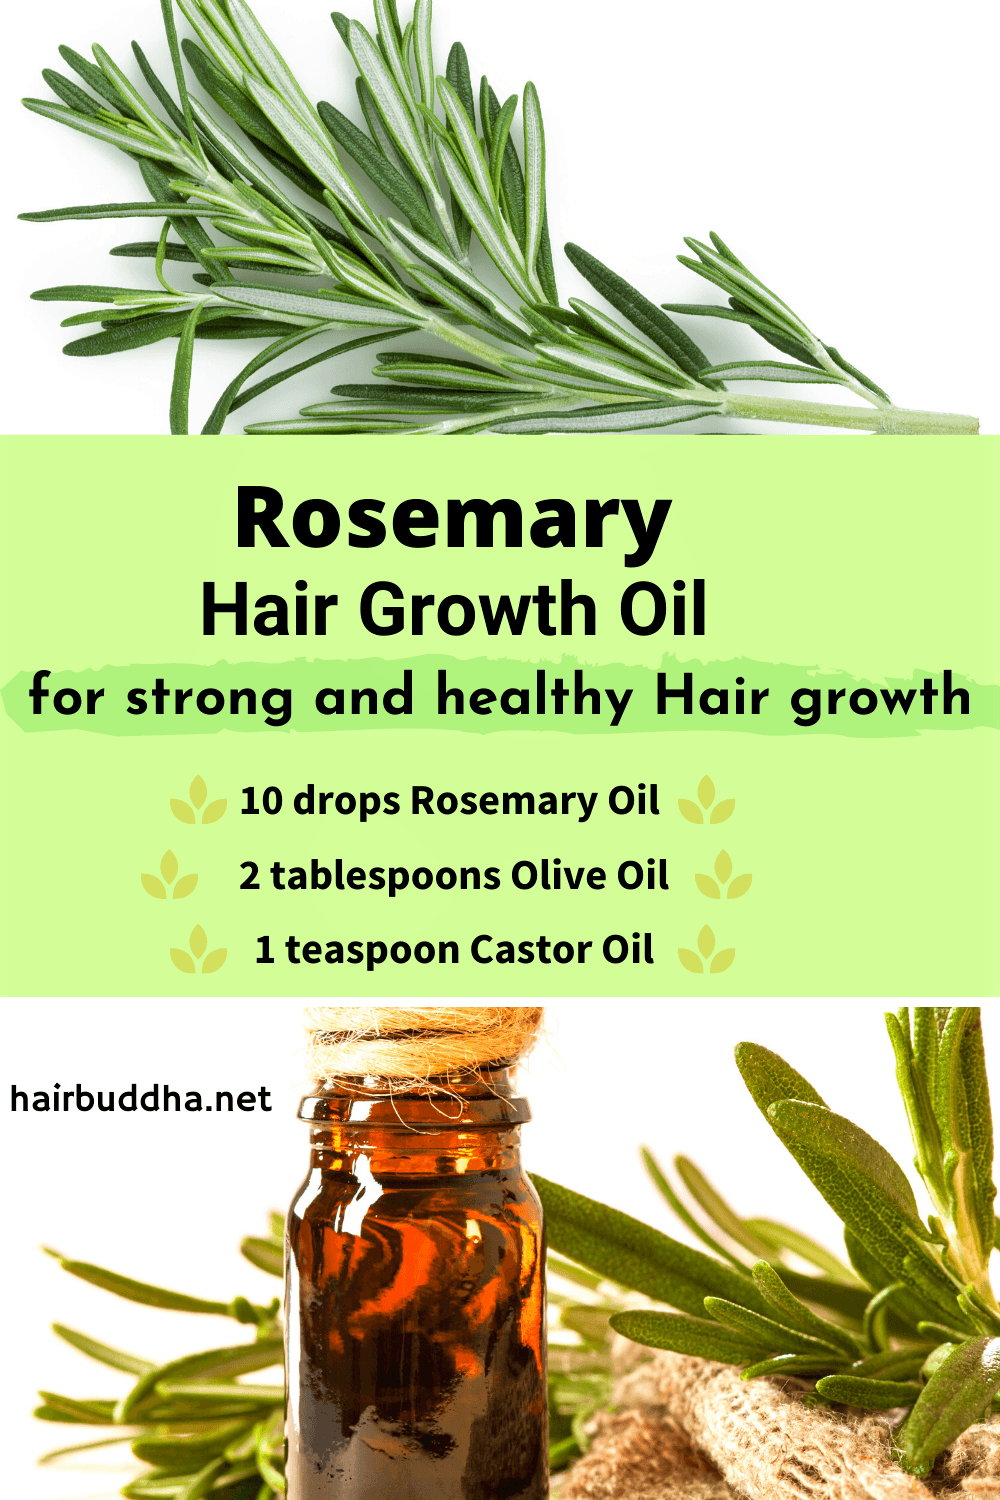 Why Use Rosemary Oil for Hair Growth (Helps with Androgenic Alopecia ) -  hair buddha